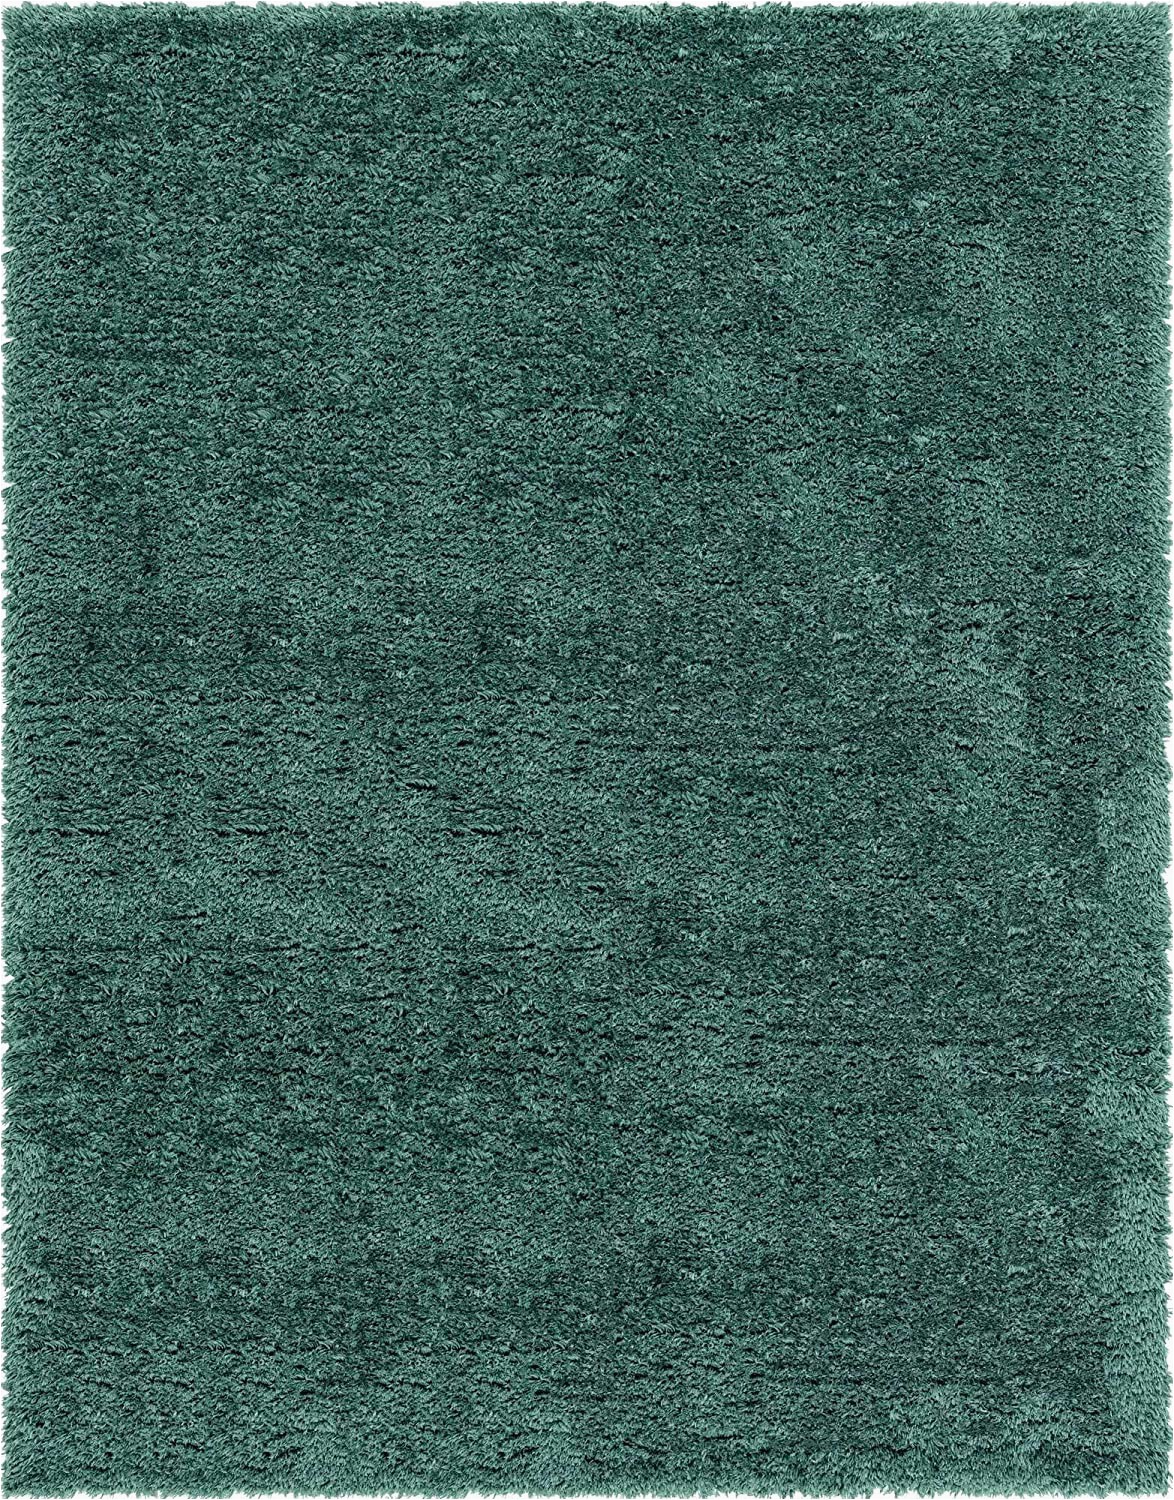 Dark Green area Rug 5×7 Infinity Collection solid Shag area Rug by Rugs – Green 8 X 10 High Pile Plush Shag Rug Perfect for Living Rooms Bedrooms Dining Rooms and